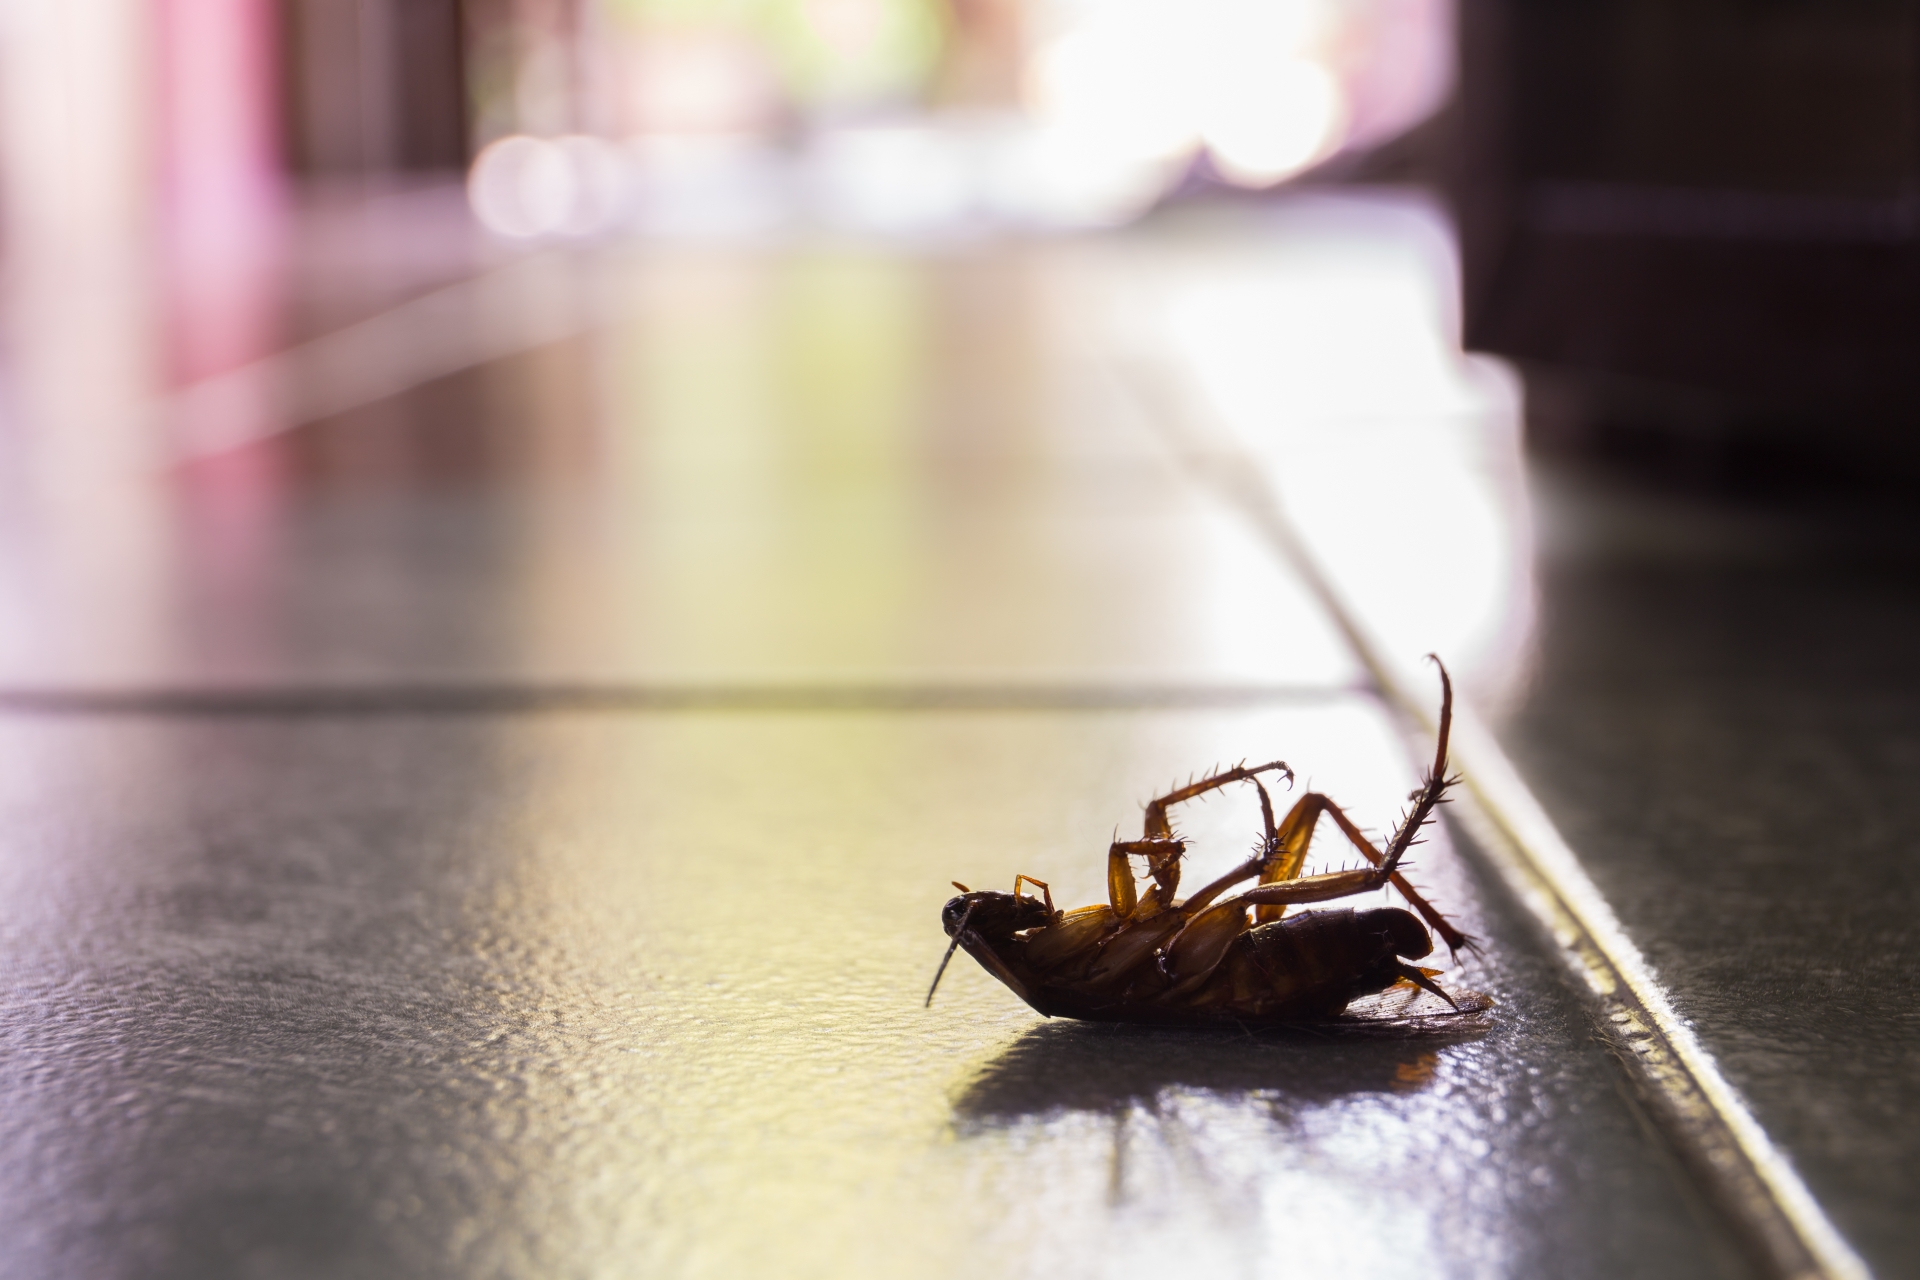 Cockroach Control, Pest Control in Cricklewood, NW2. Call Now 020 8166 9746